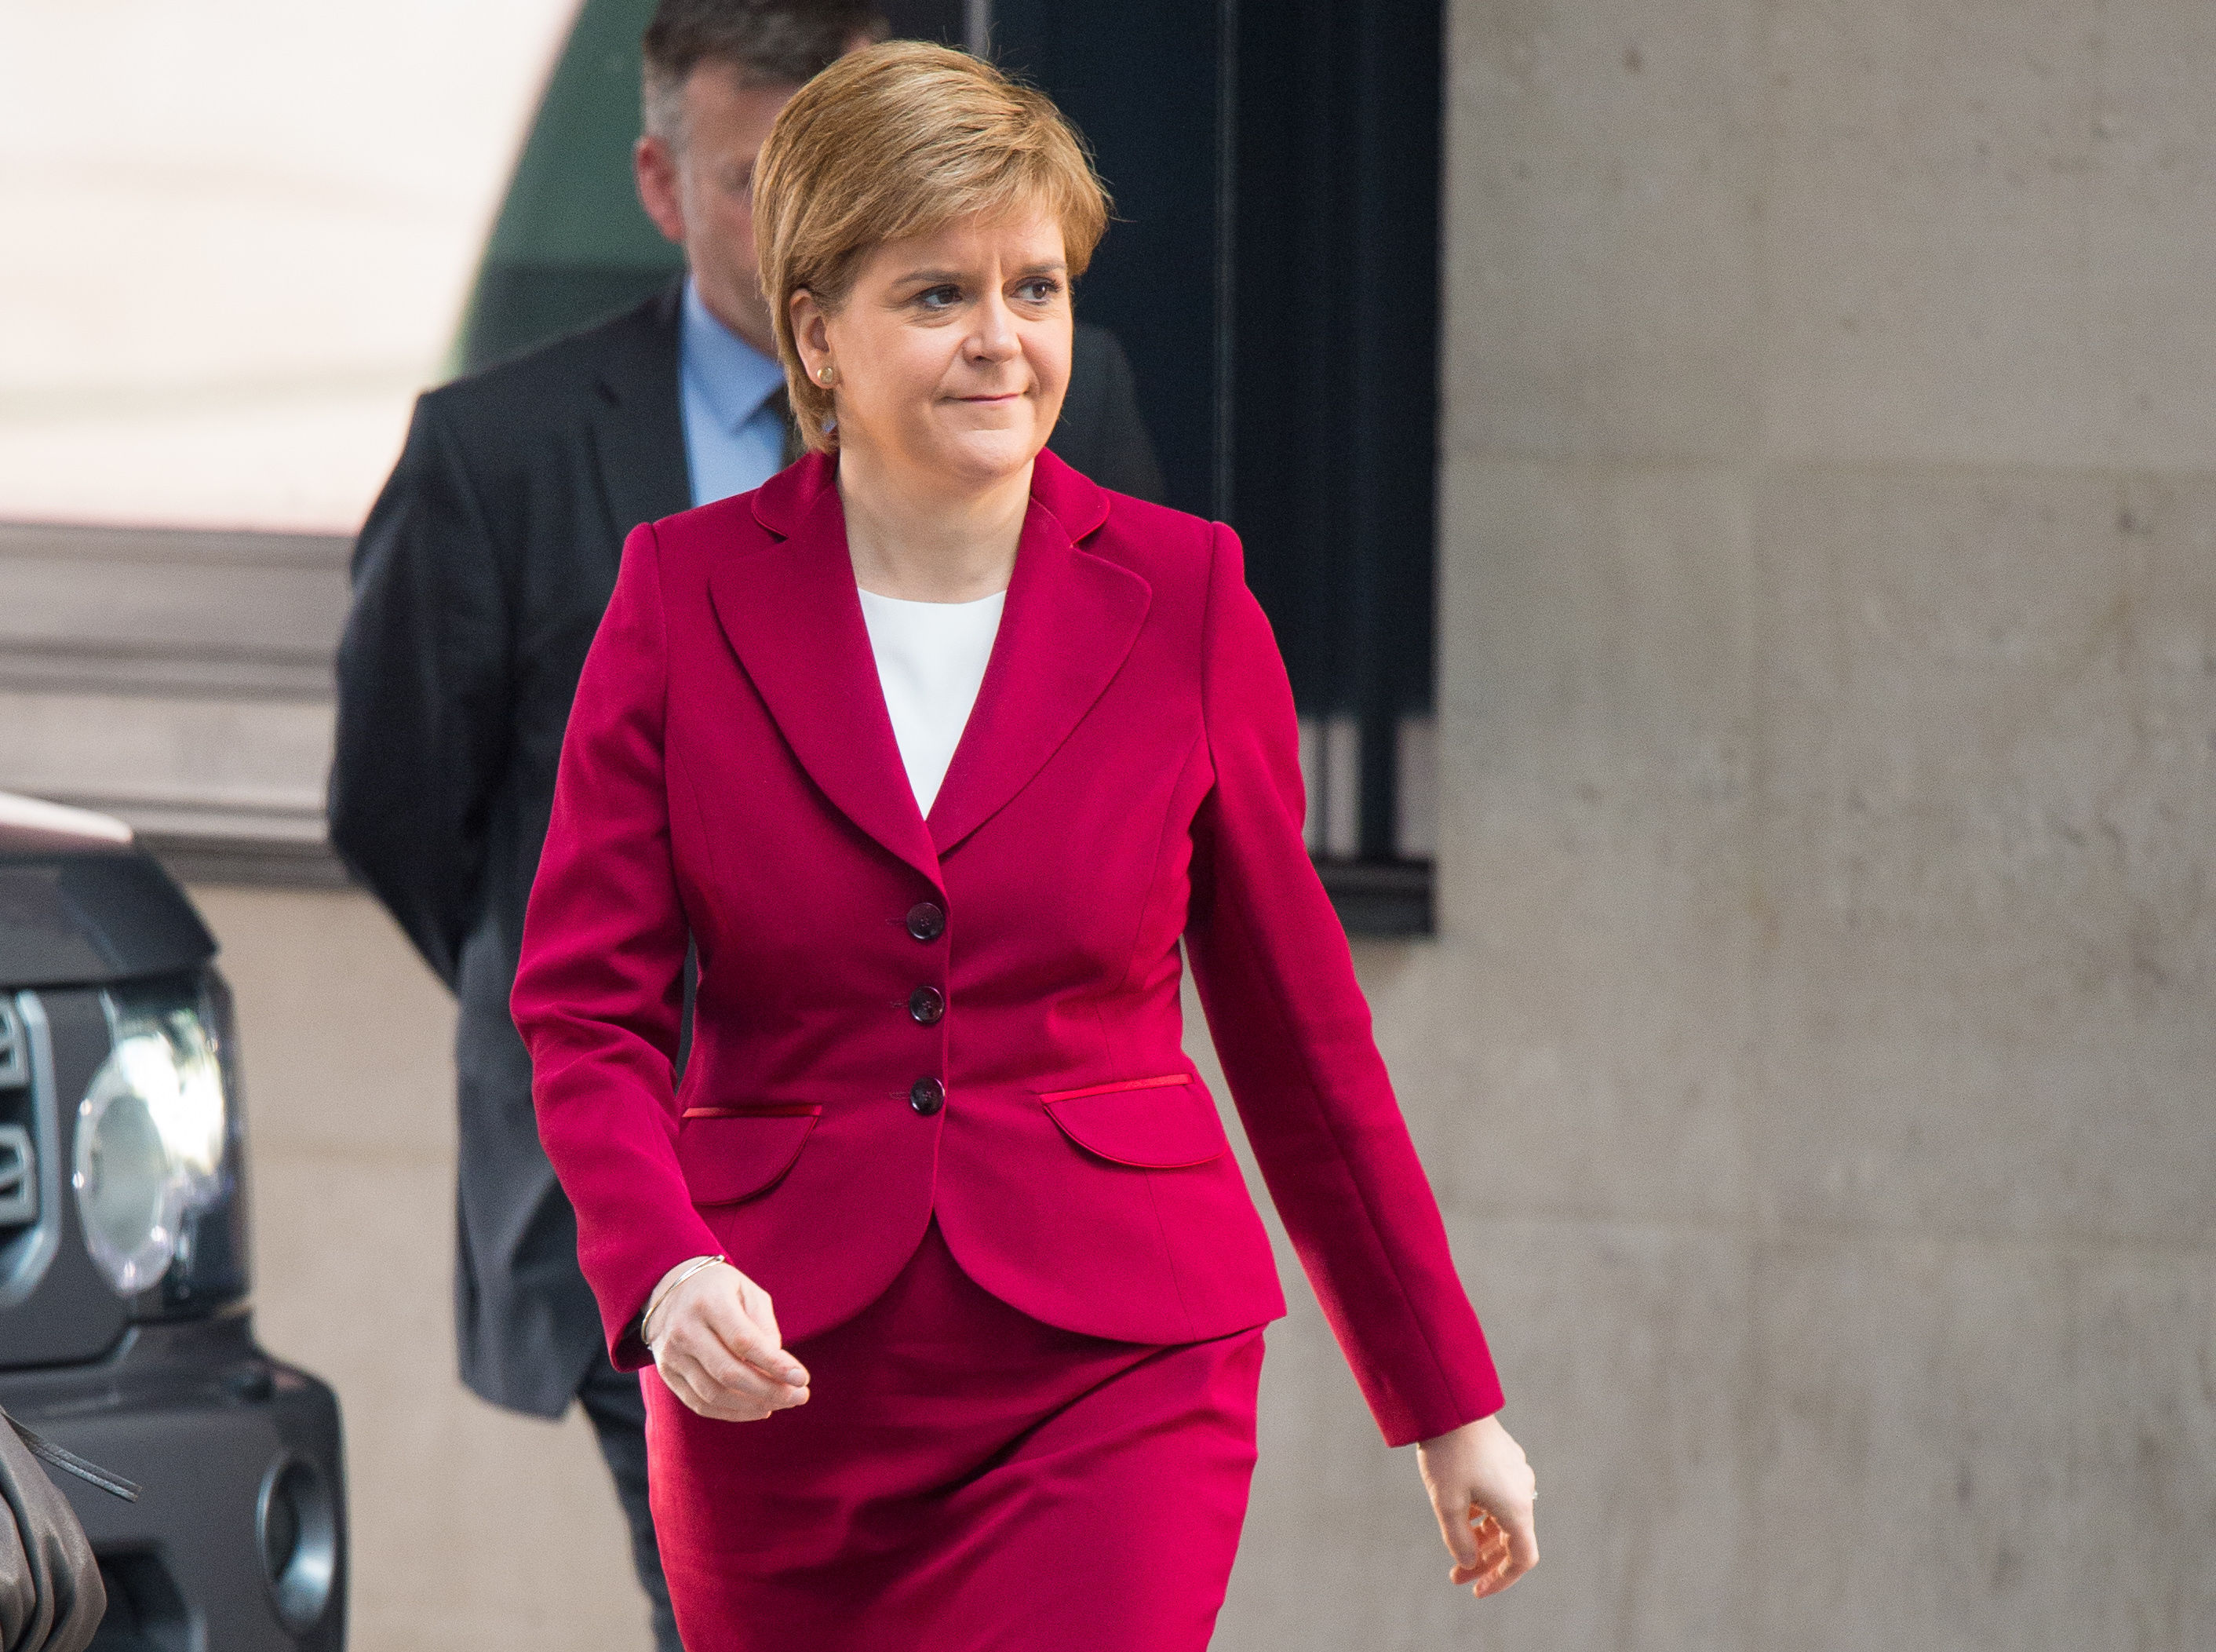 First Minister and SNP leader Nicola Sturgeon arrives at BBC Broadcasting House in London to appear on The Andrew Marr Show. PRESS ASSOCIATION Photo. Picture date: Sunday May 14, 2017. See PA story ELECTION stories. Photo credit should read: Dominic Lipinski/PA Wire